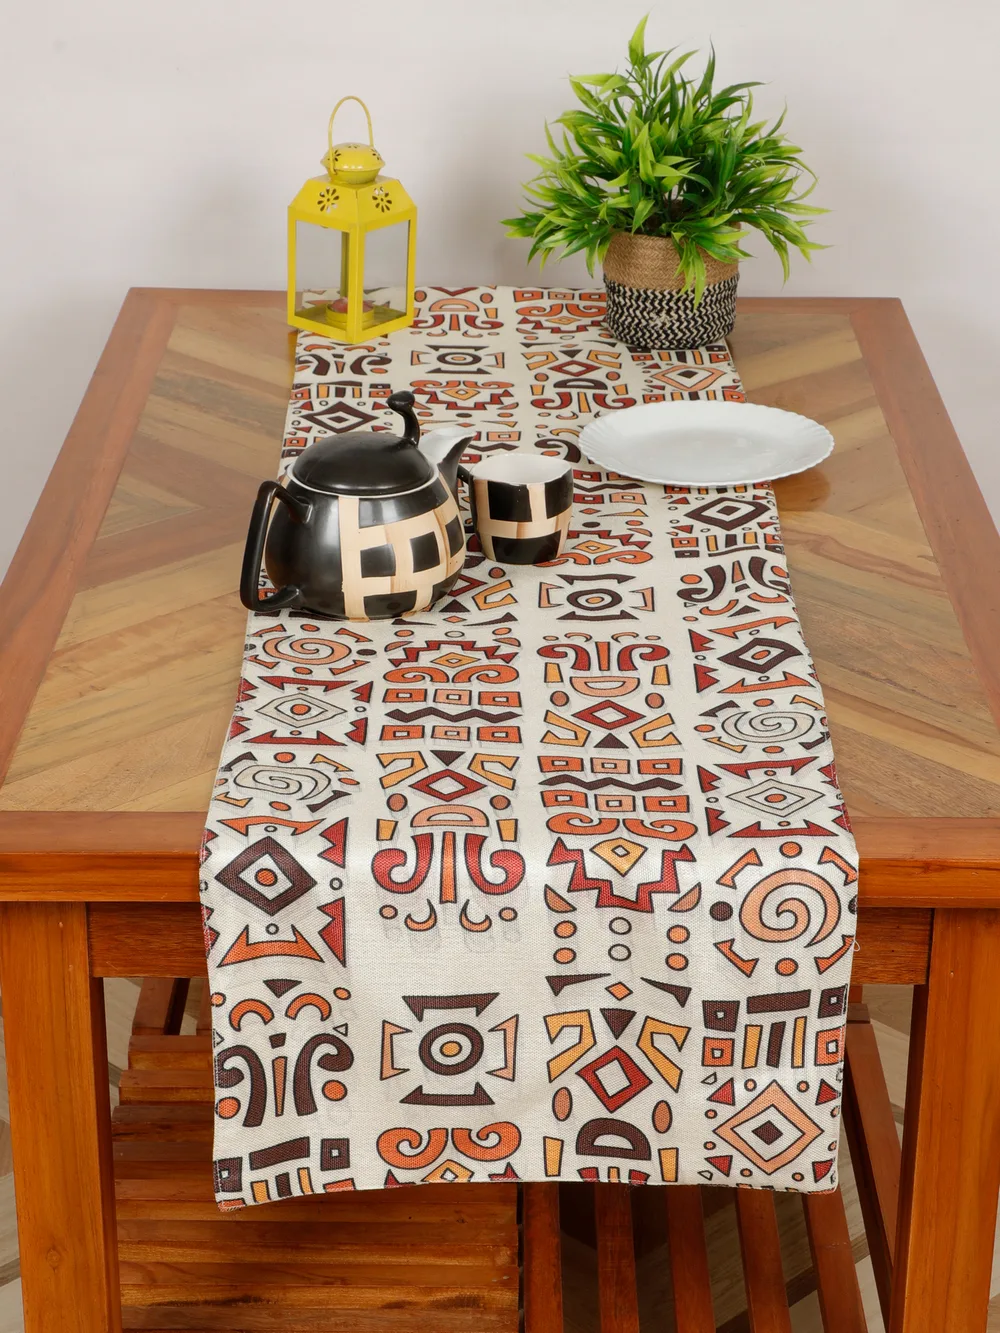 Cotton polyester printed table runner, abstract symbols, 54x14, cream, brown